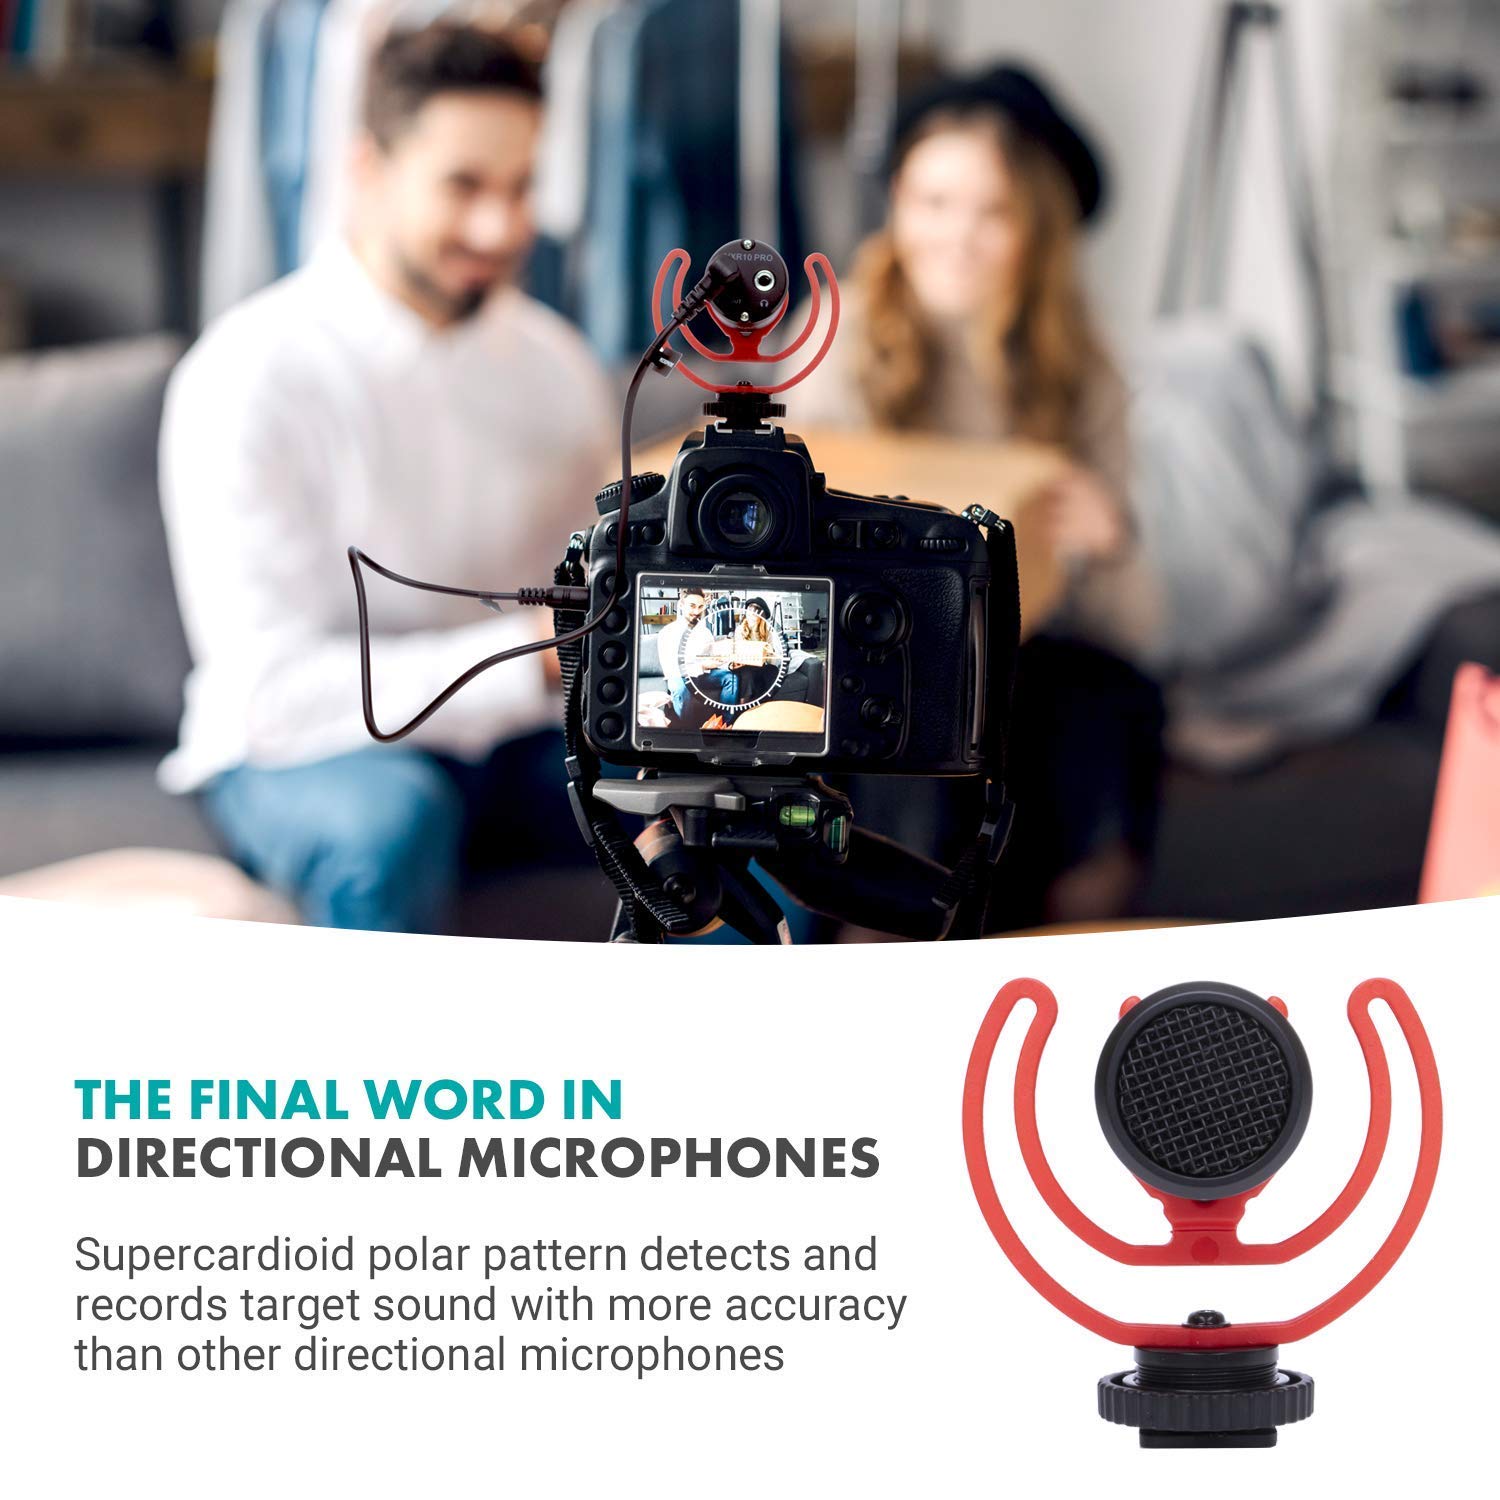 Movo VXR10-PRO External Video Microphone for Camera with Rotating Grip Handle, Shock Mount - Compact Shotgun Mic Compatible with Smartphones and DSLR Cameras - Battery-Free DSLR Microphone